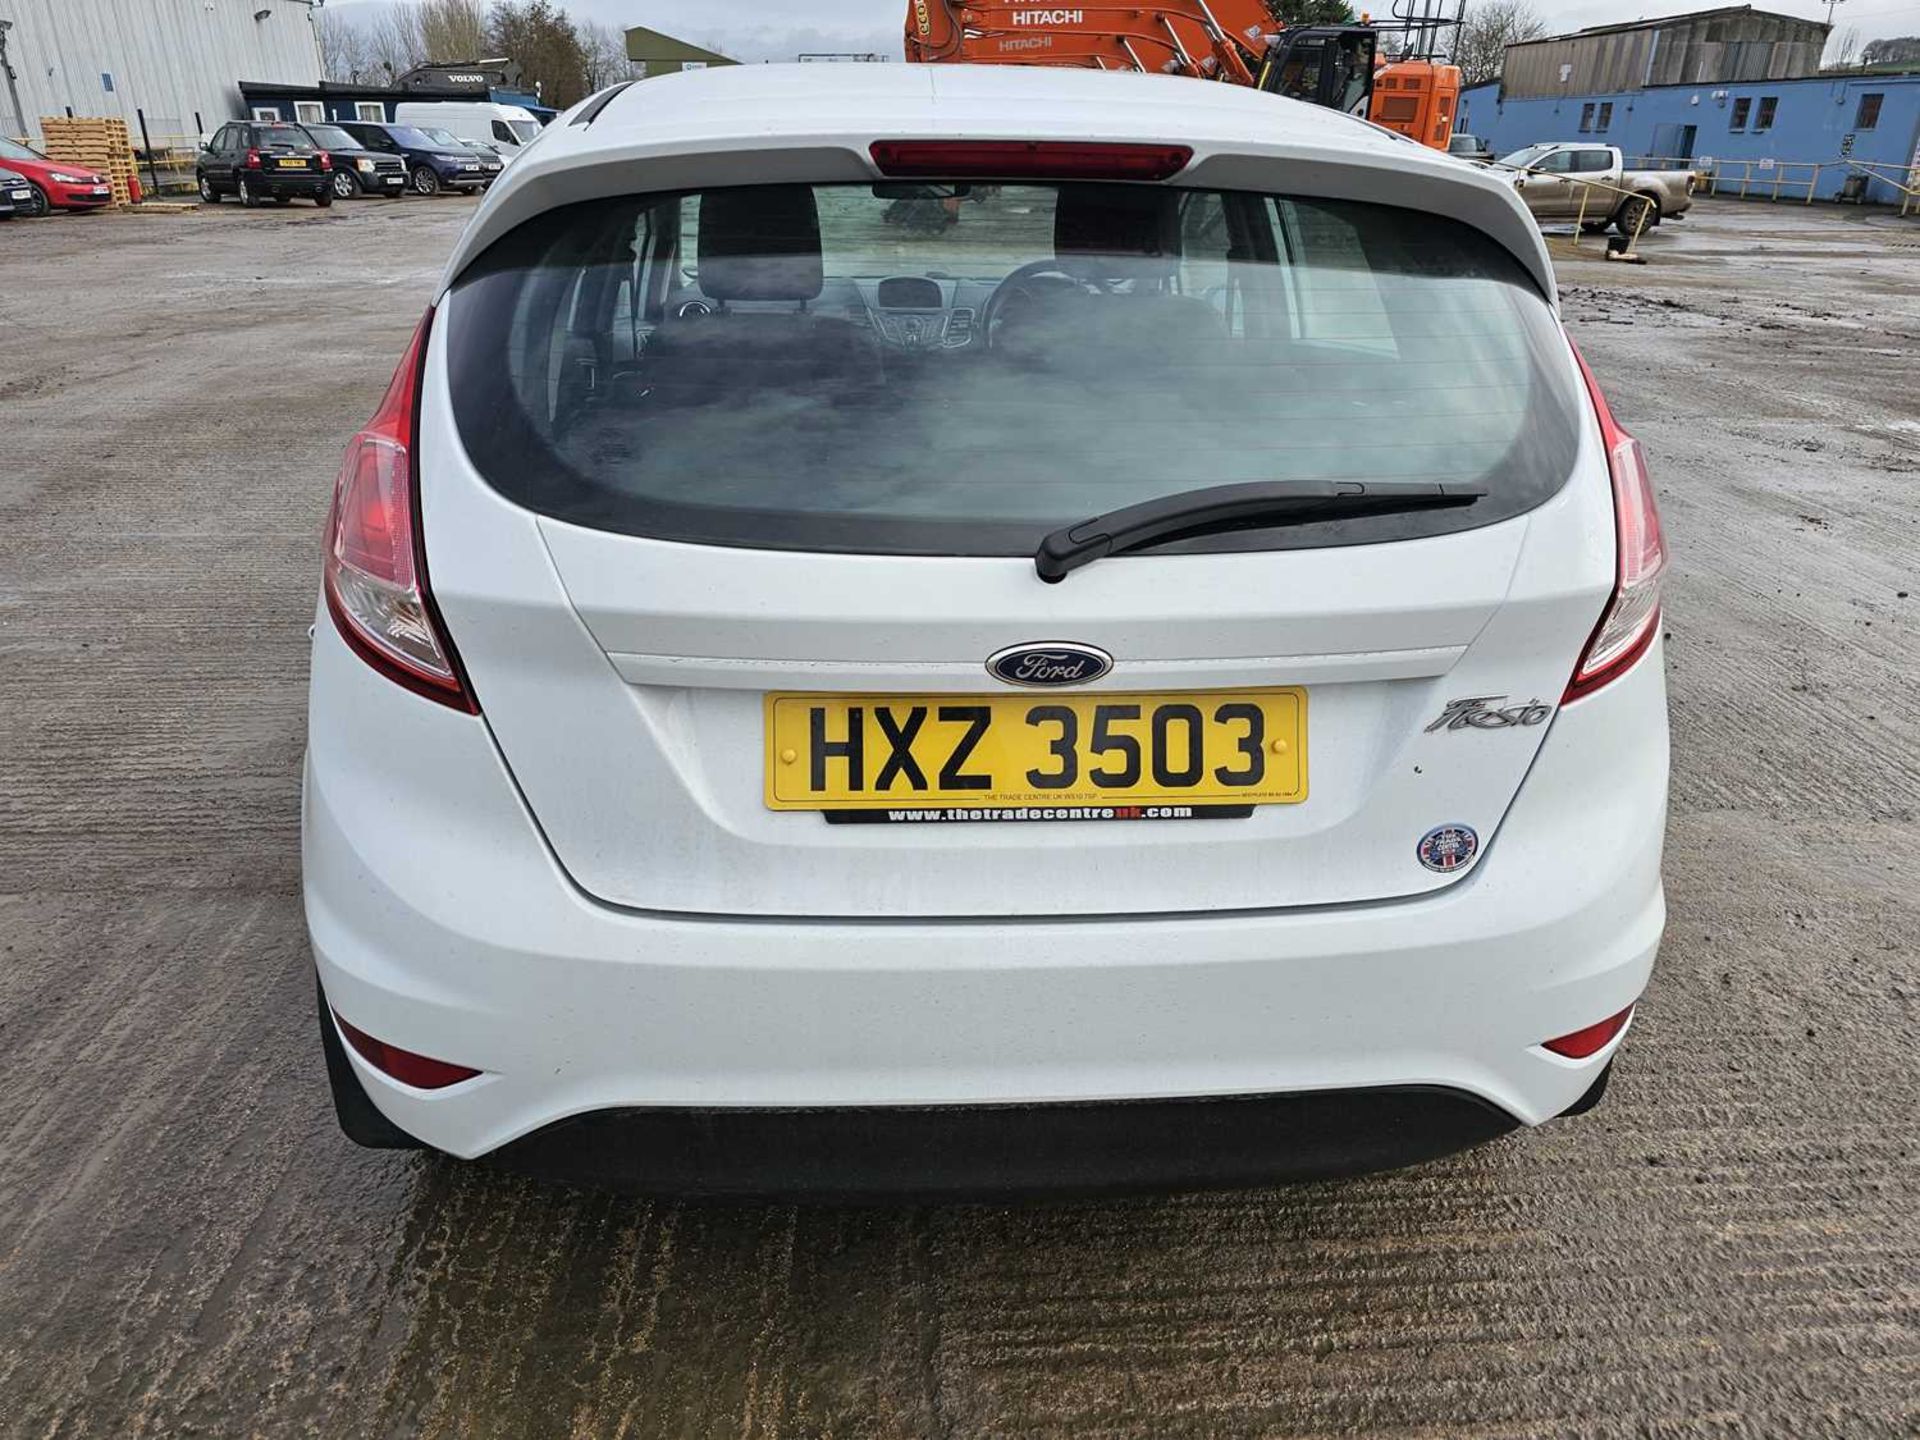 2015 Ford Fiesta, 5 Speed, Bluetooth, A/C (Reg. Docs. & Service History Available, Tested 01/25) - Image 3 of 28